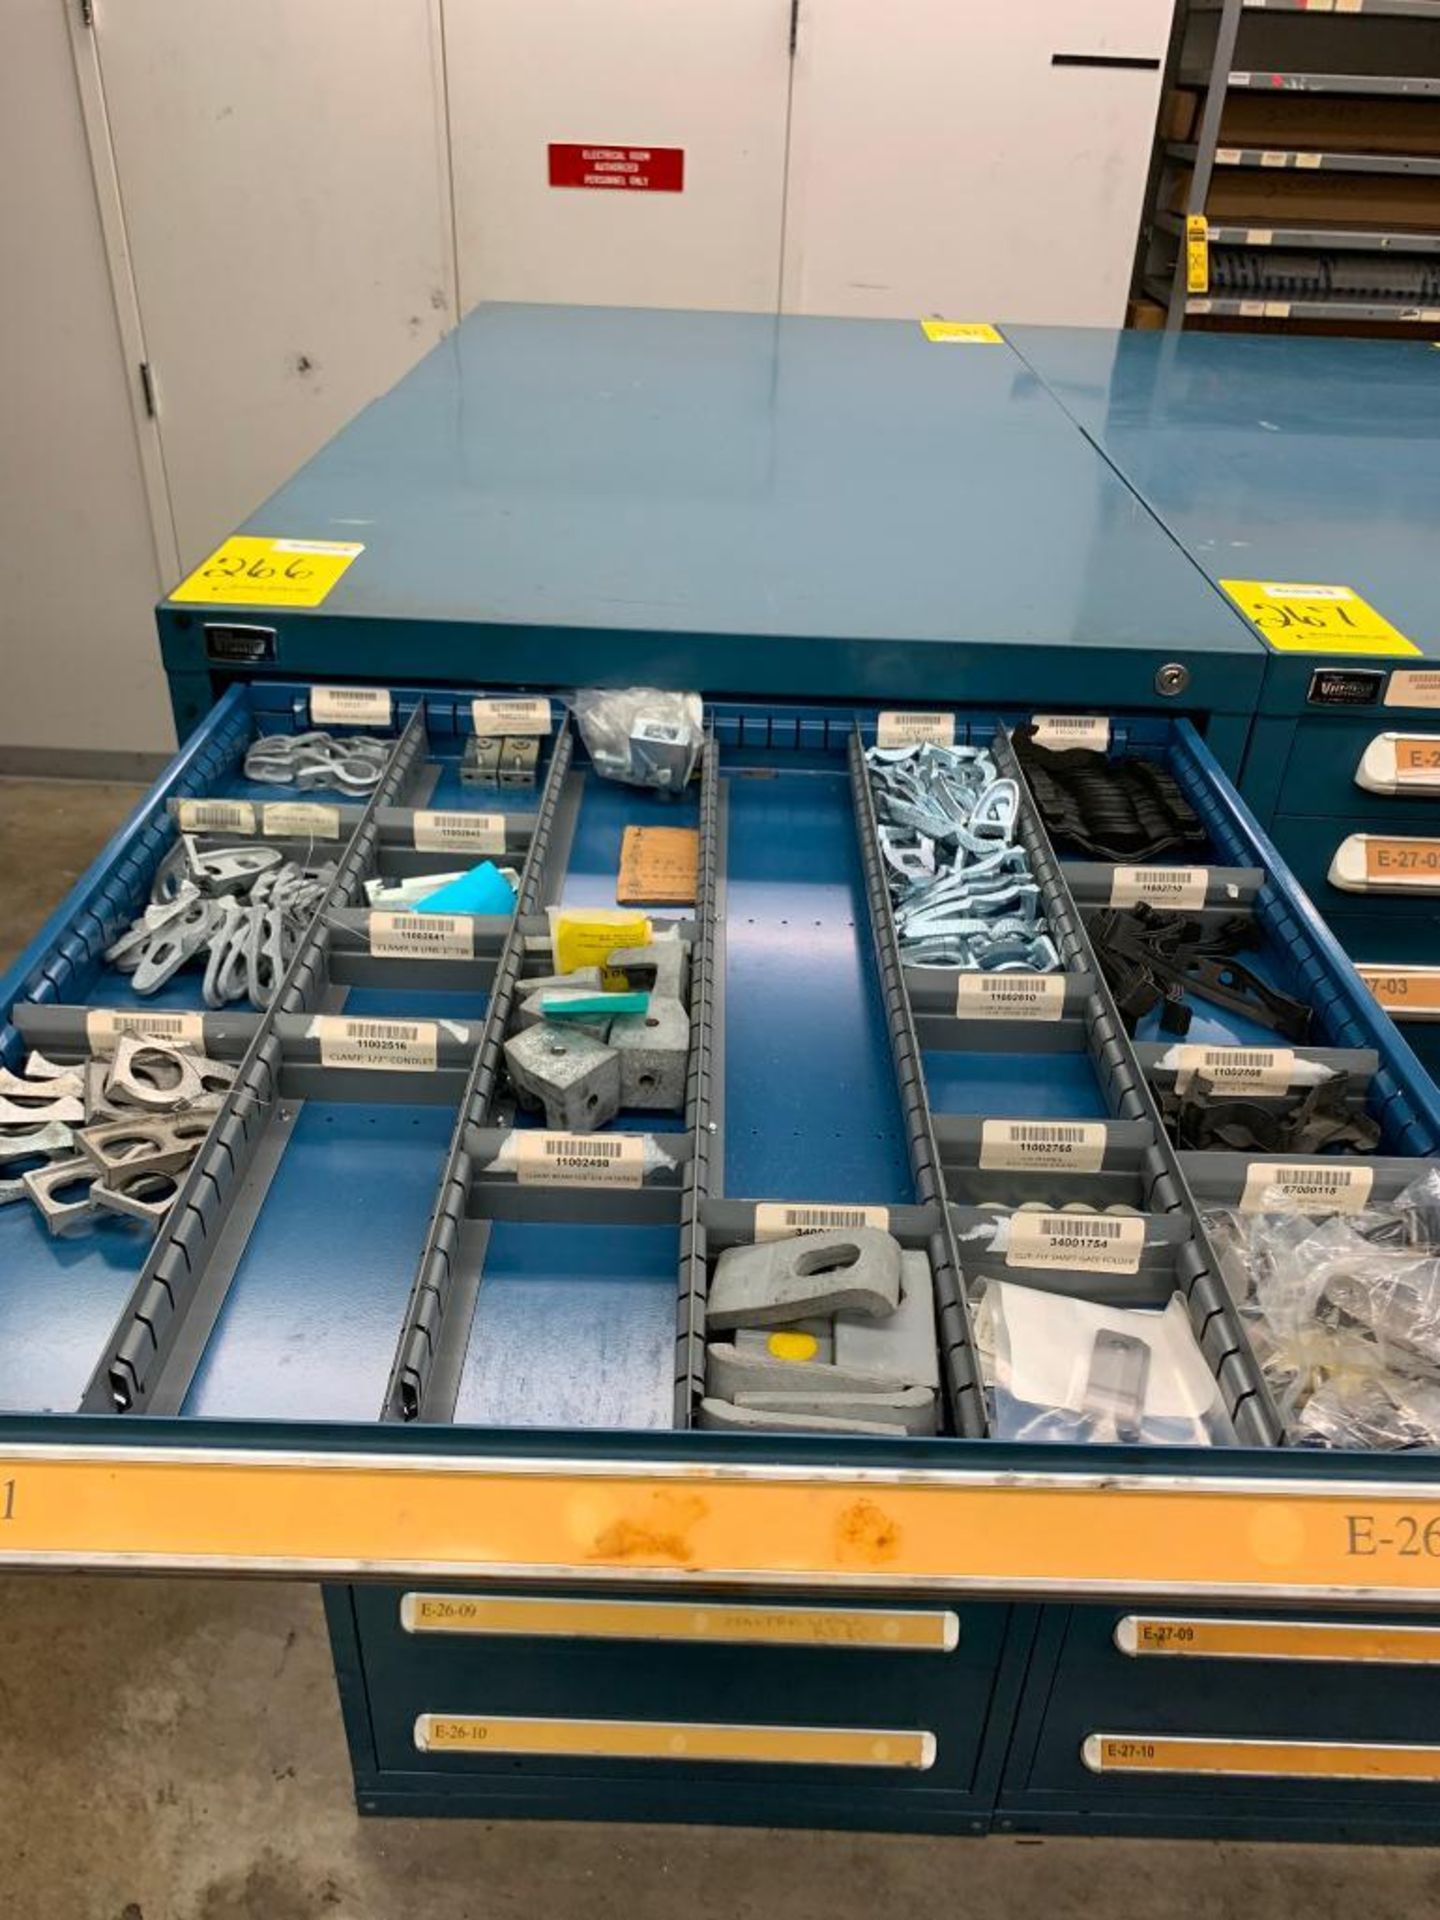 Vidmar 10-Drawer Cabinet w/ Clamps, Chain Links, Snap-In Blanks, Conduit Connectors, Couplings - Image 3 of 14